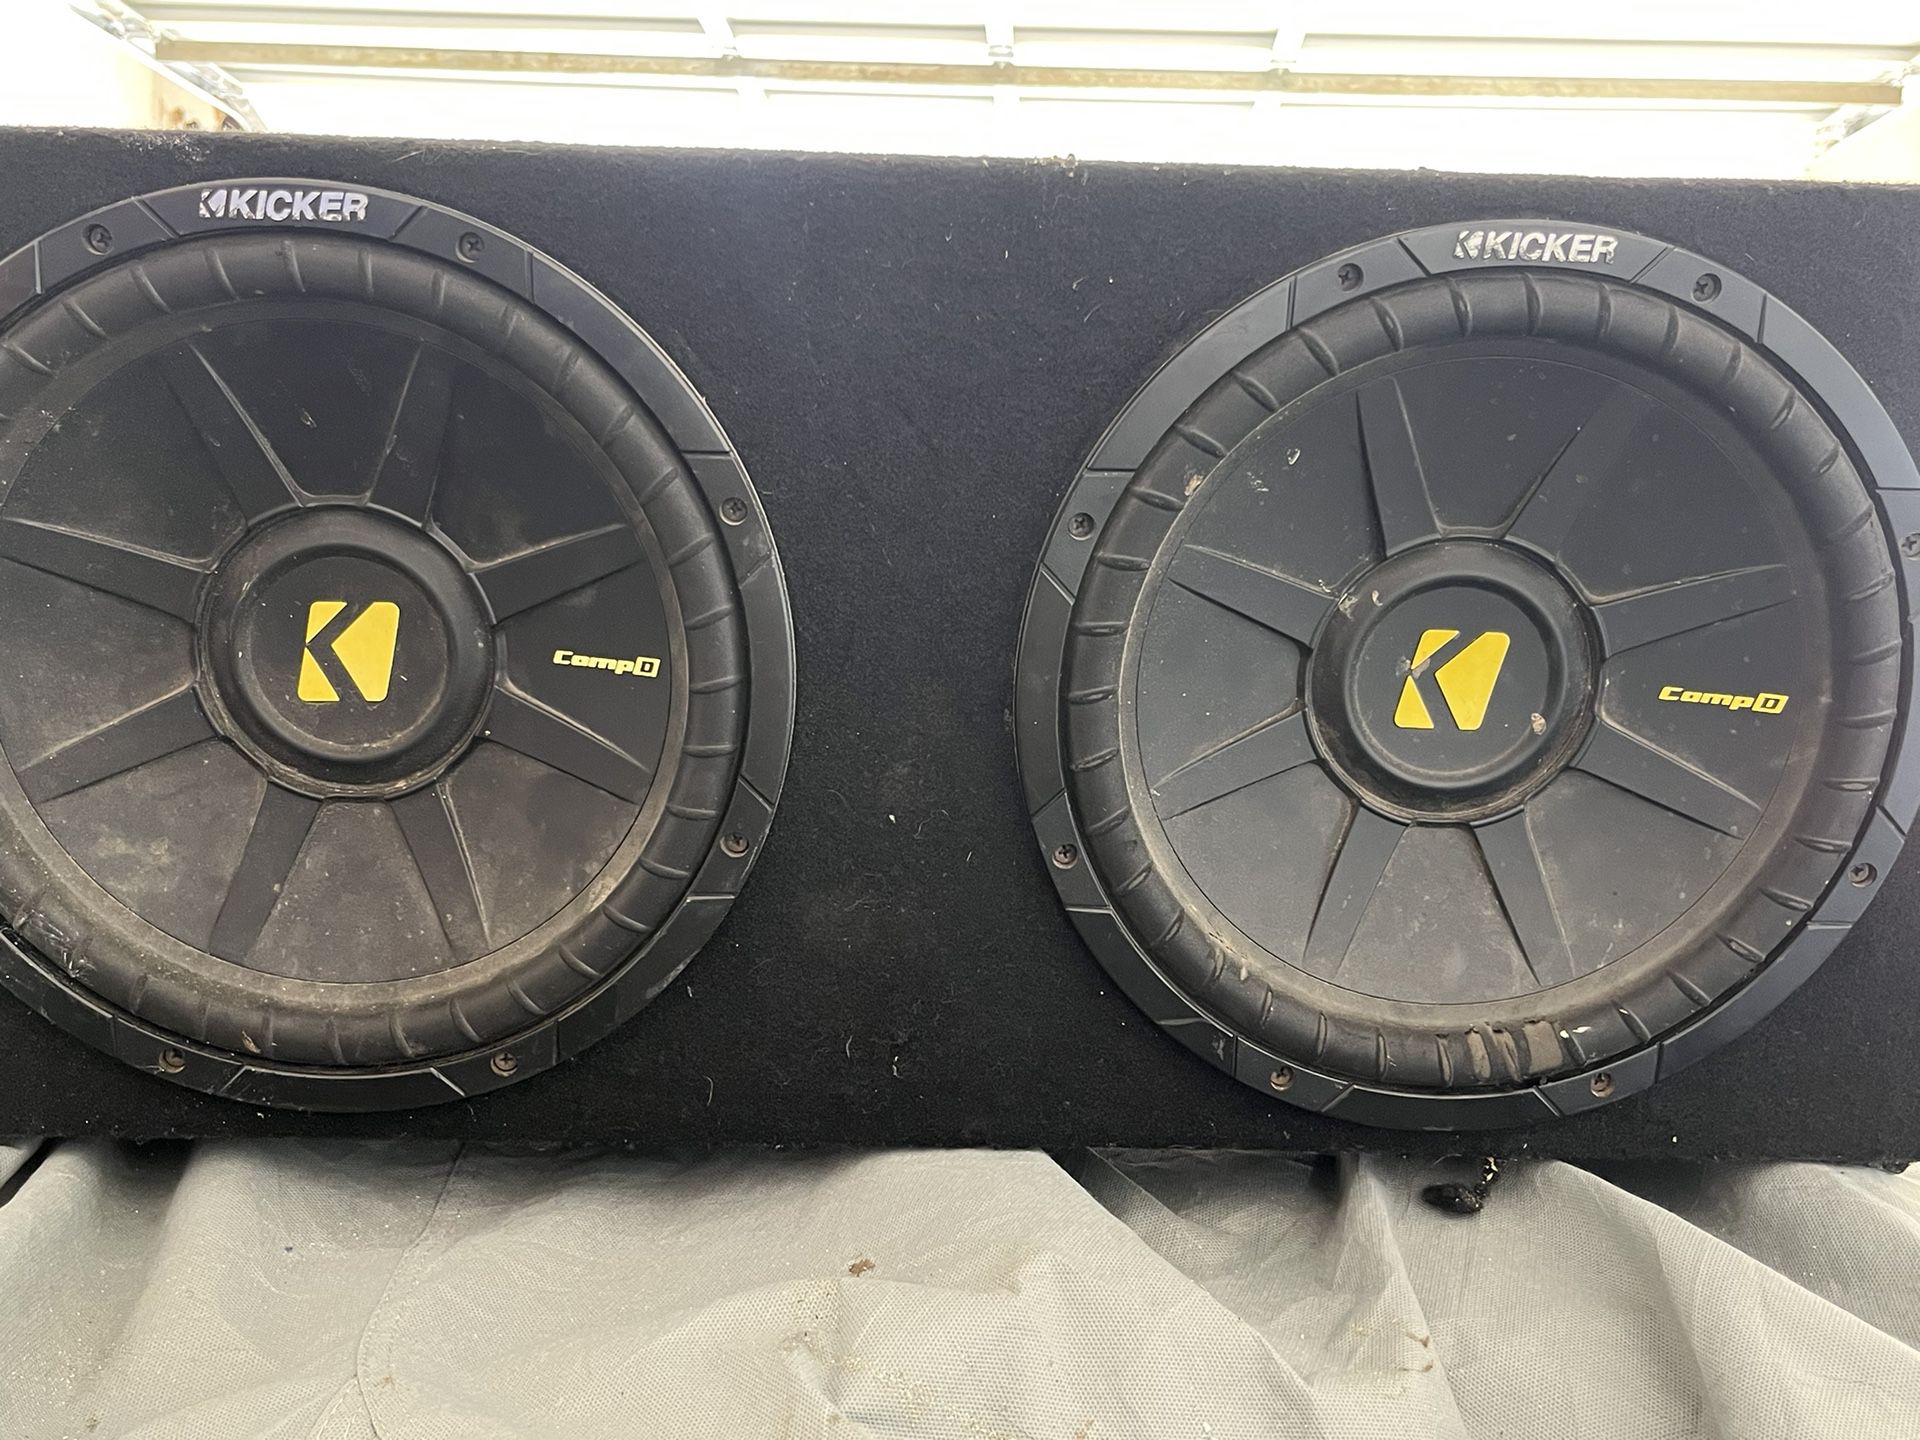 Two 12 Inch Kicker Subwoofers And Amp